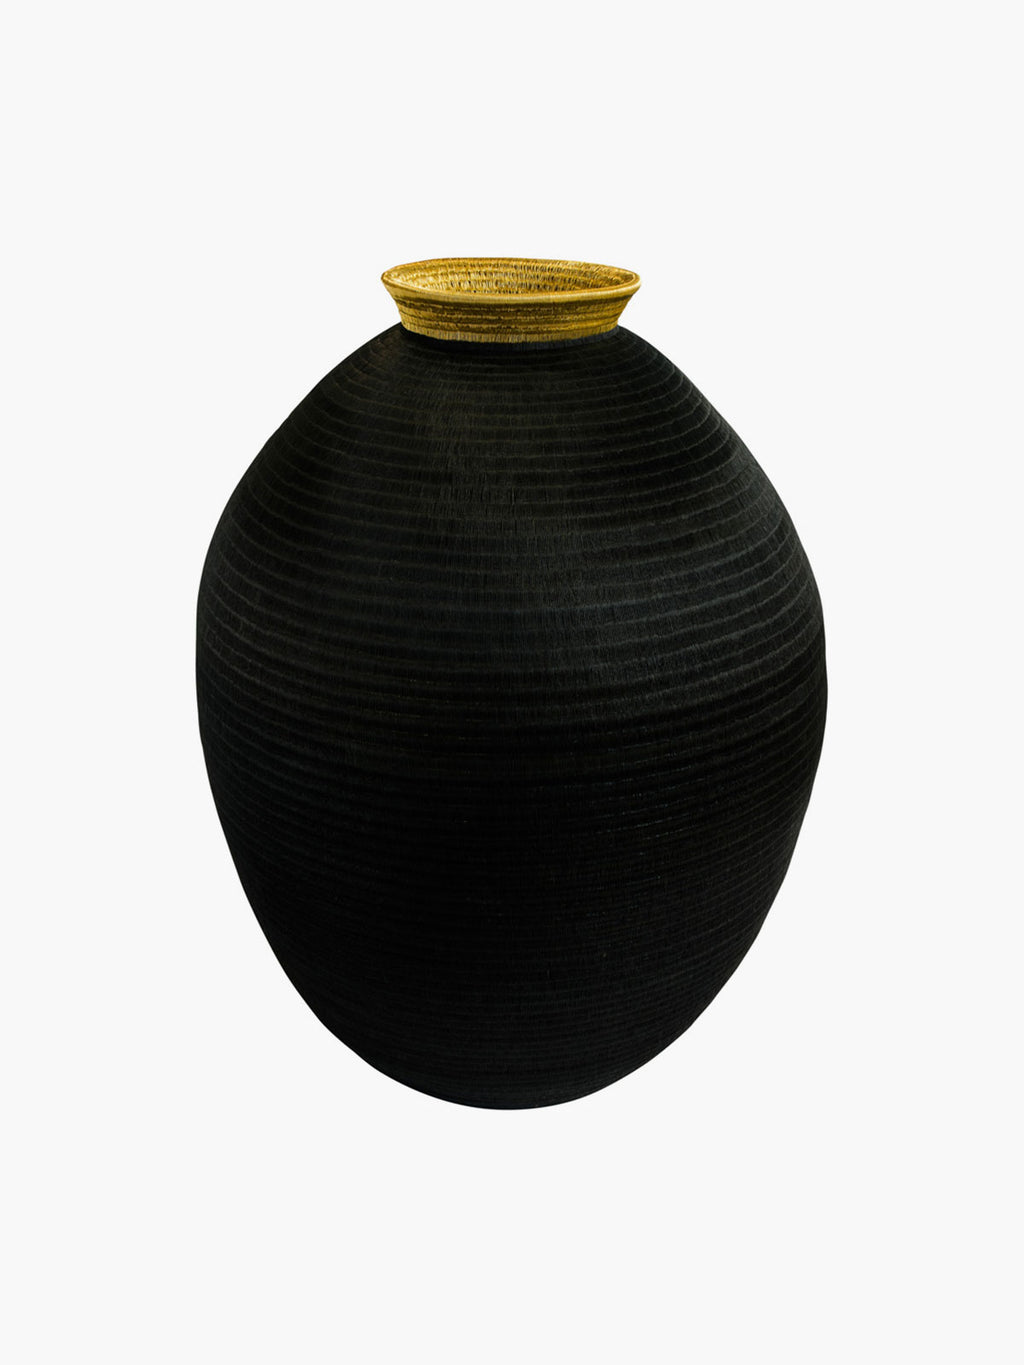 Werregue Container | Black and Gold